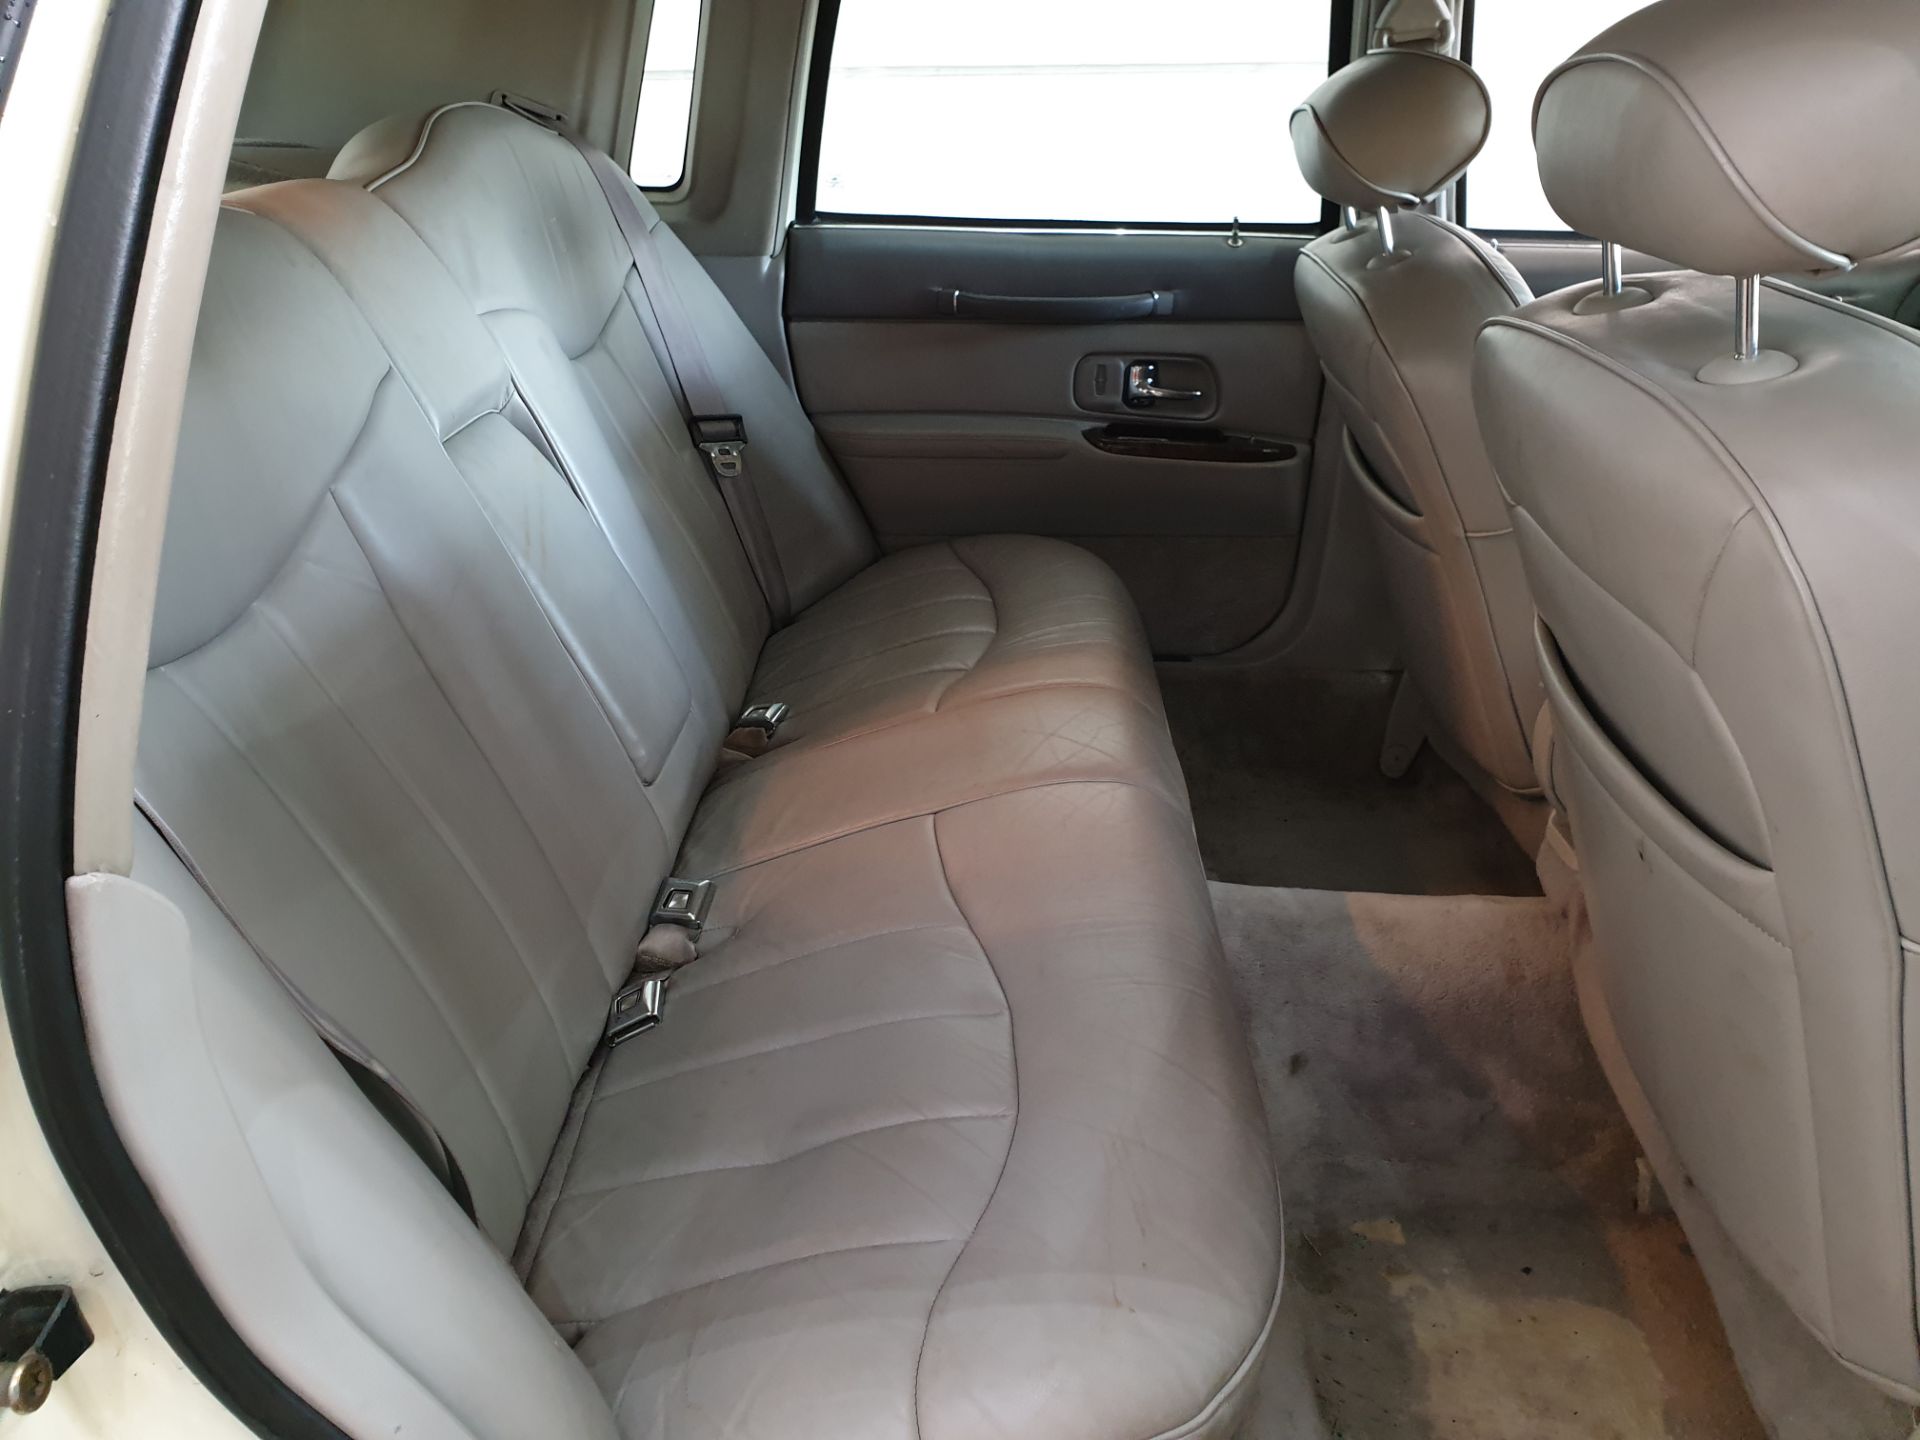 1999 Lincoln Town Car - Image 9 of 16